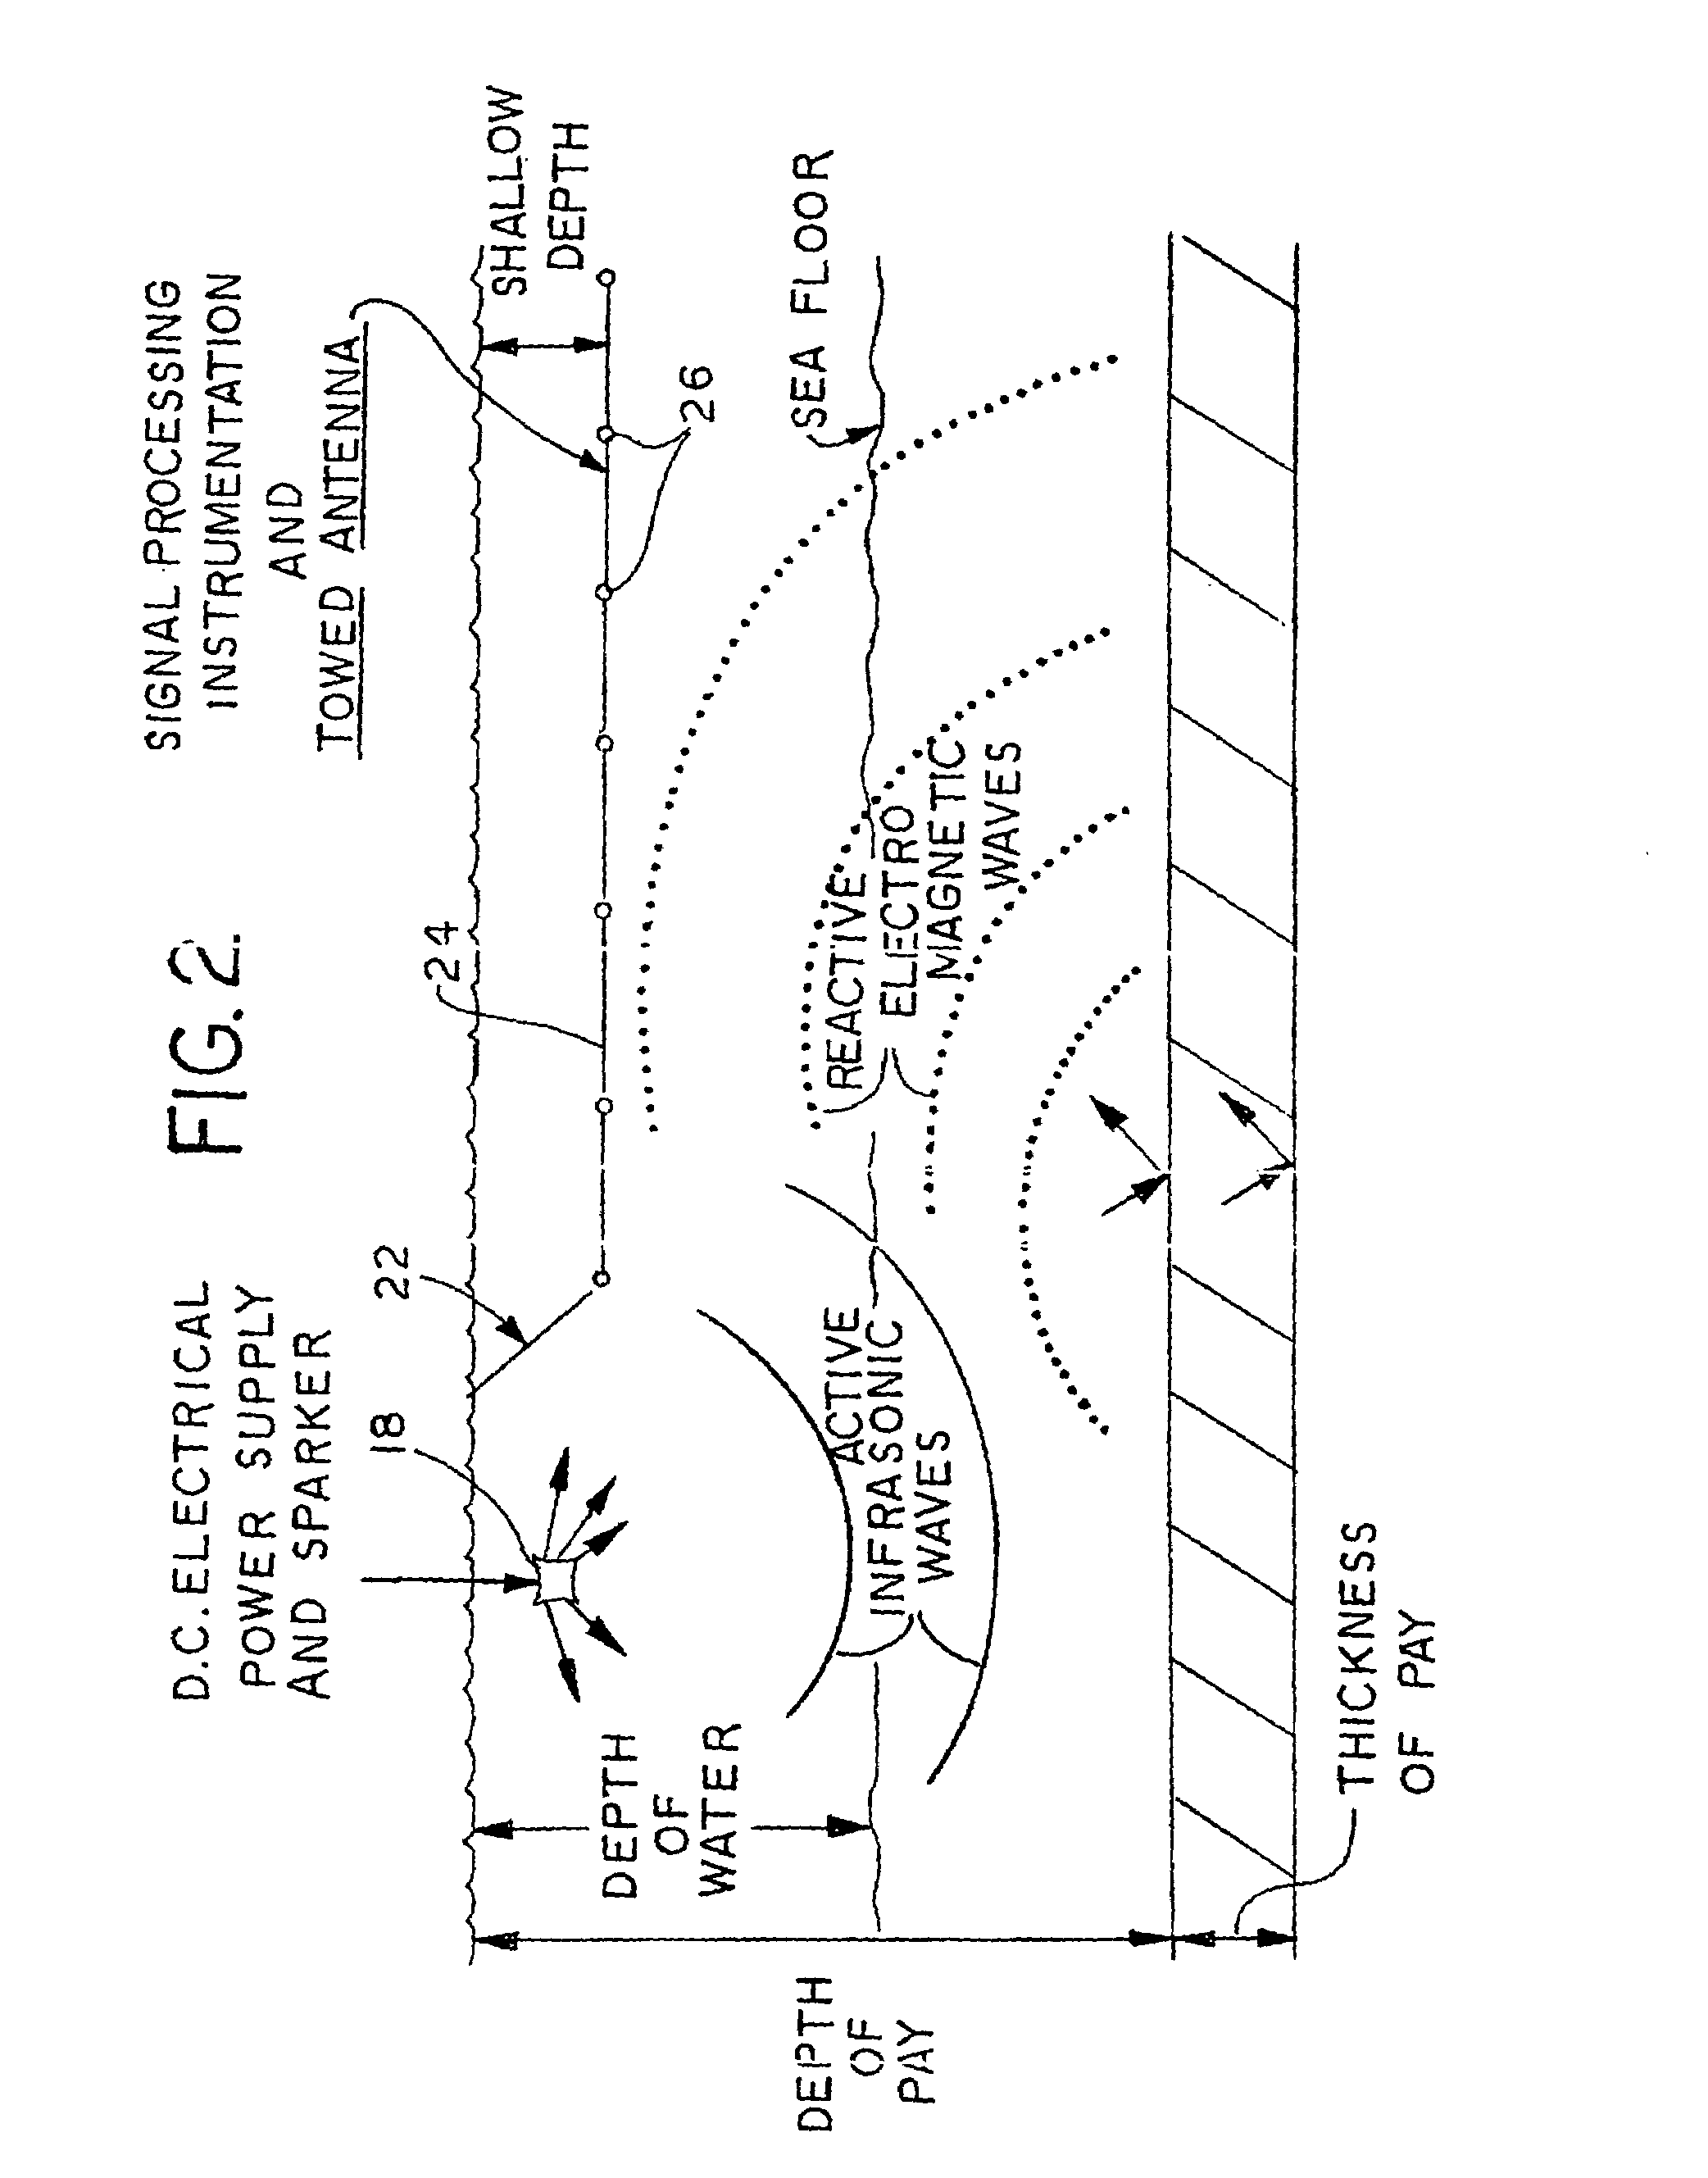 Method of geologic exploration for subsurface deposits